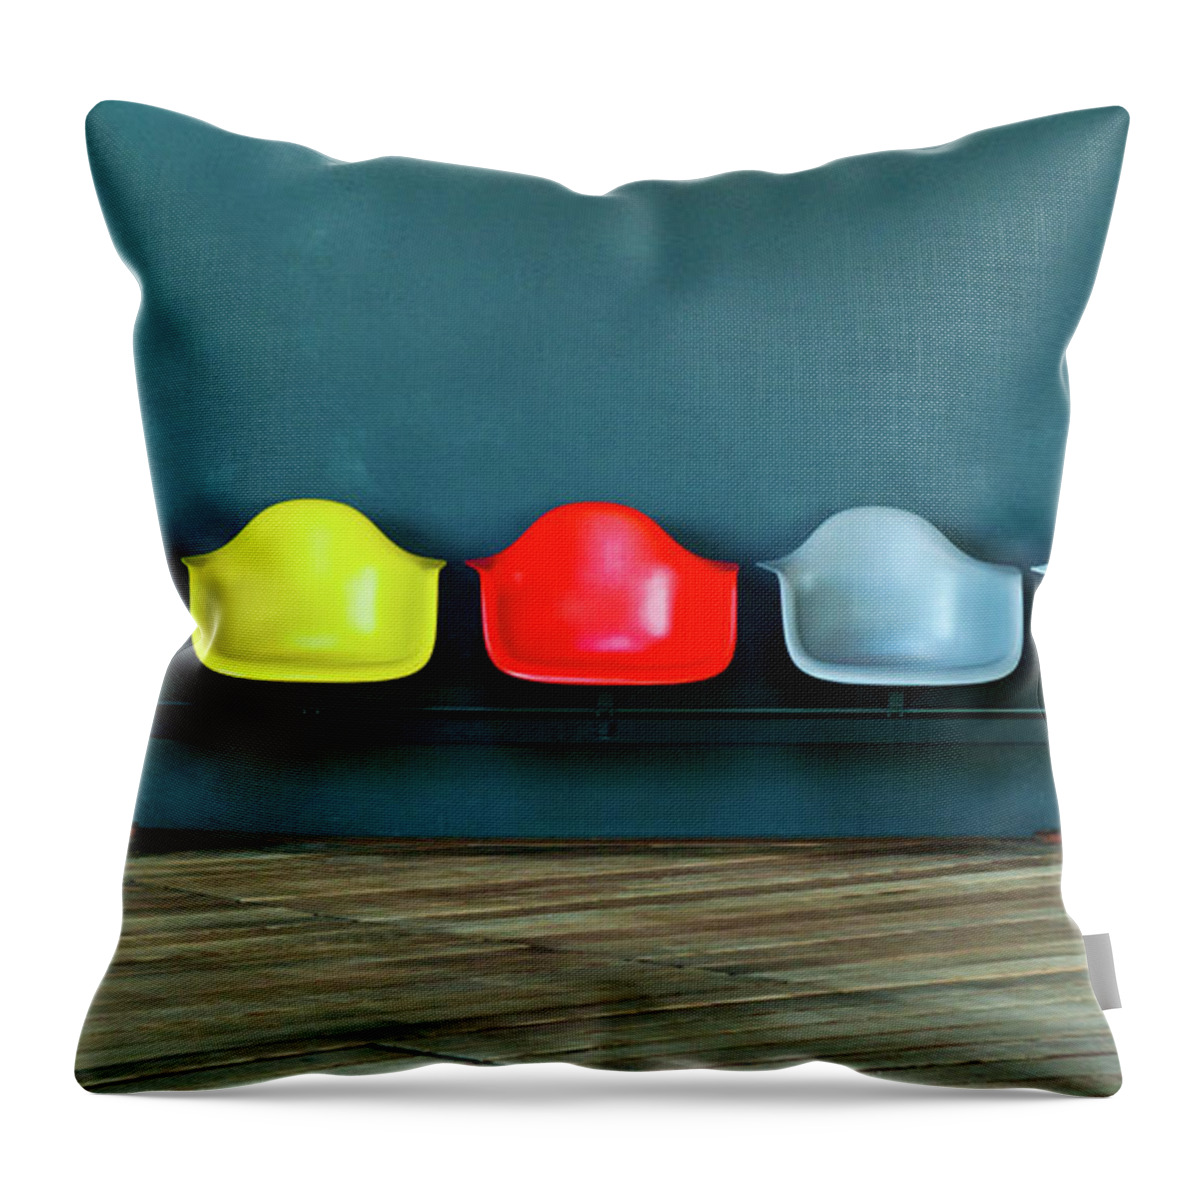 Five Objects Throw Pillow featuring the photograph Have A Break by Tablinumcarlson